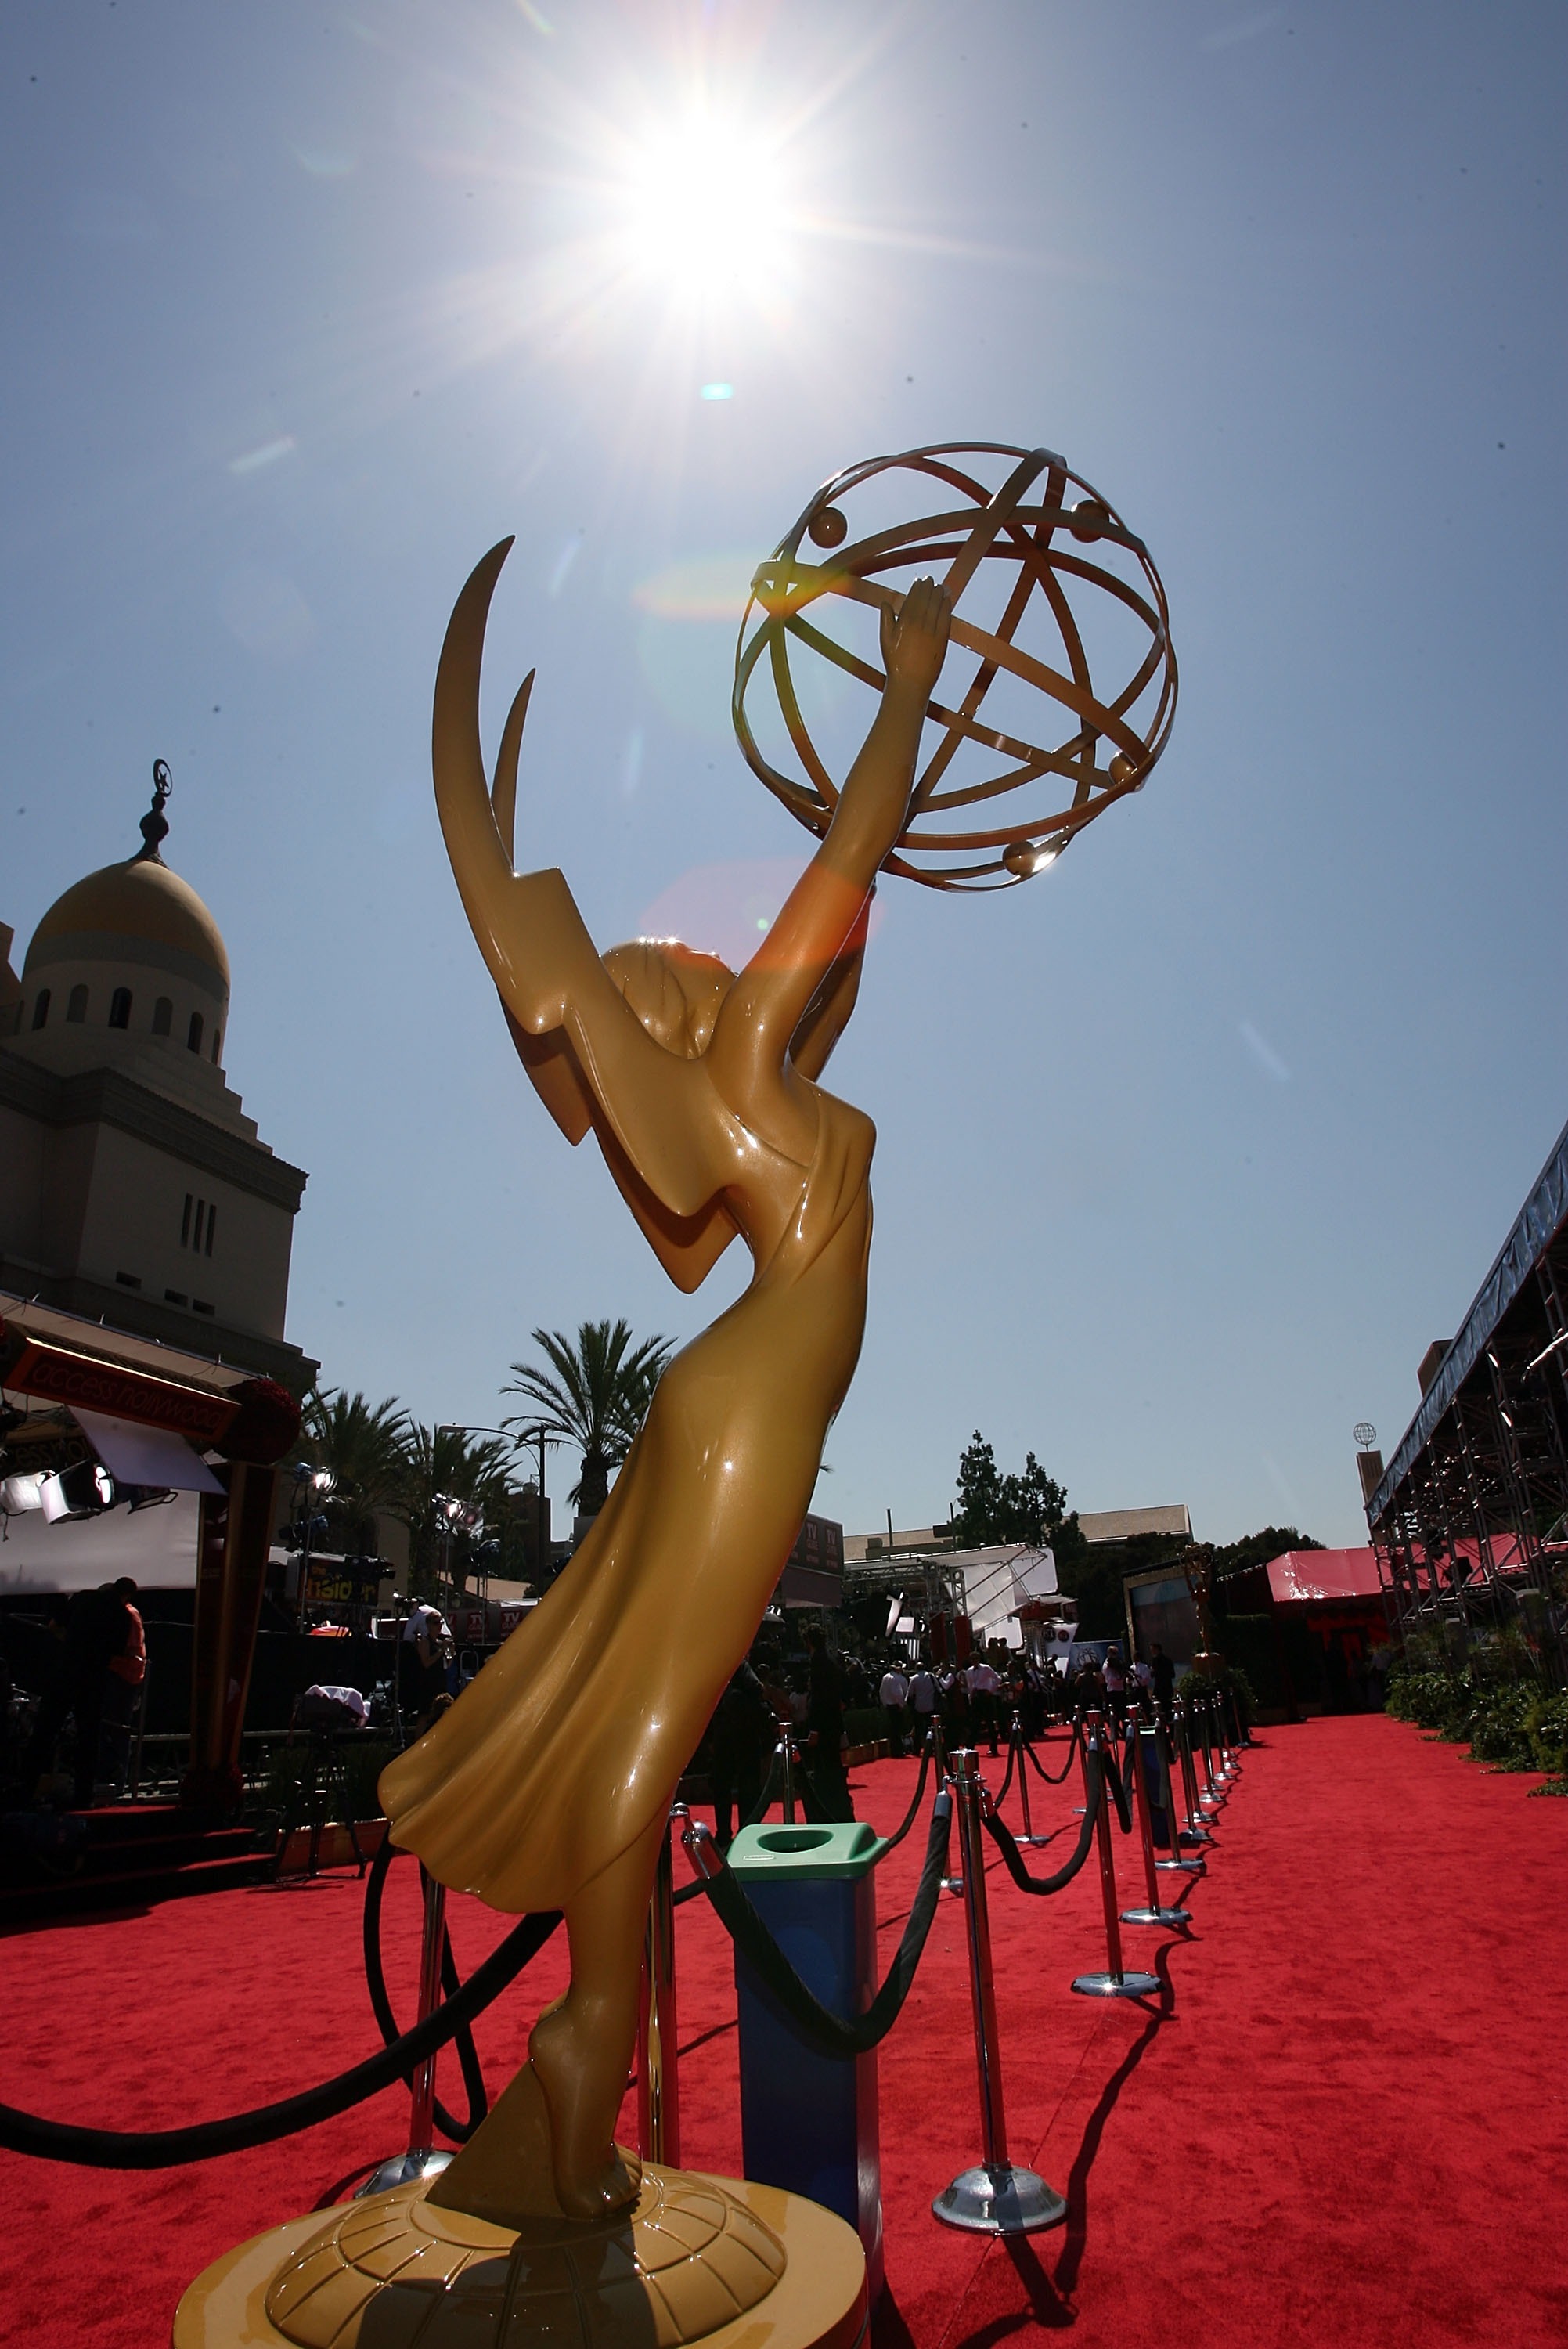 A view of the Emmy Award statue during the arrivals at the 59th Annual Primetime Emmy Awards at the Shrine Auditorium on September 16, 2007 in Los Angeles, California. (Frazer Harrison&mdash;Getty Images)